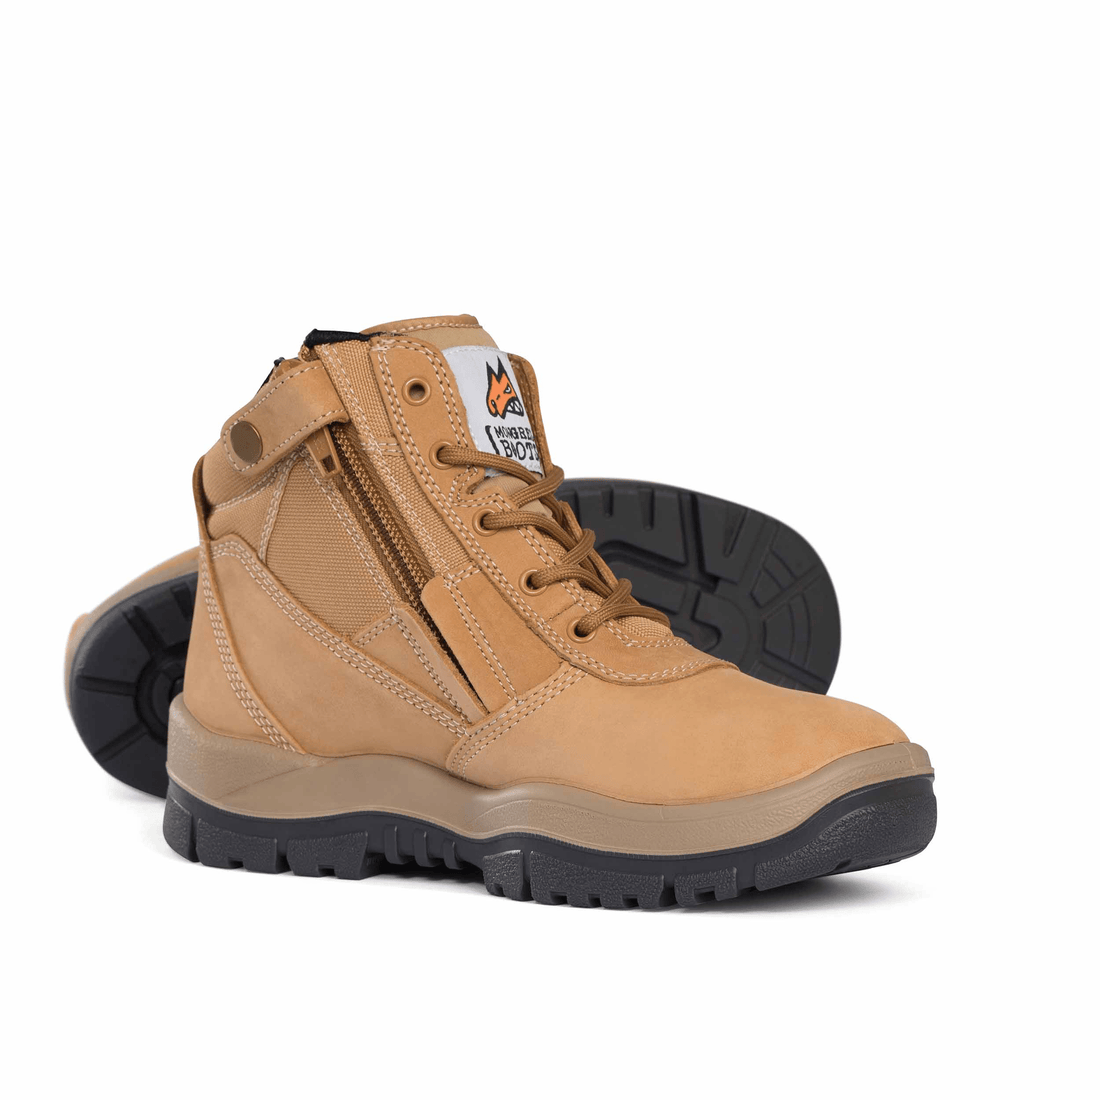 MONGREL ZipSider Safety Boots